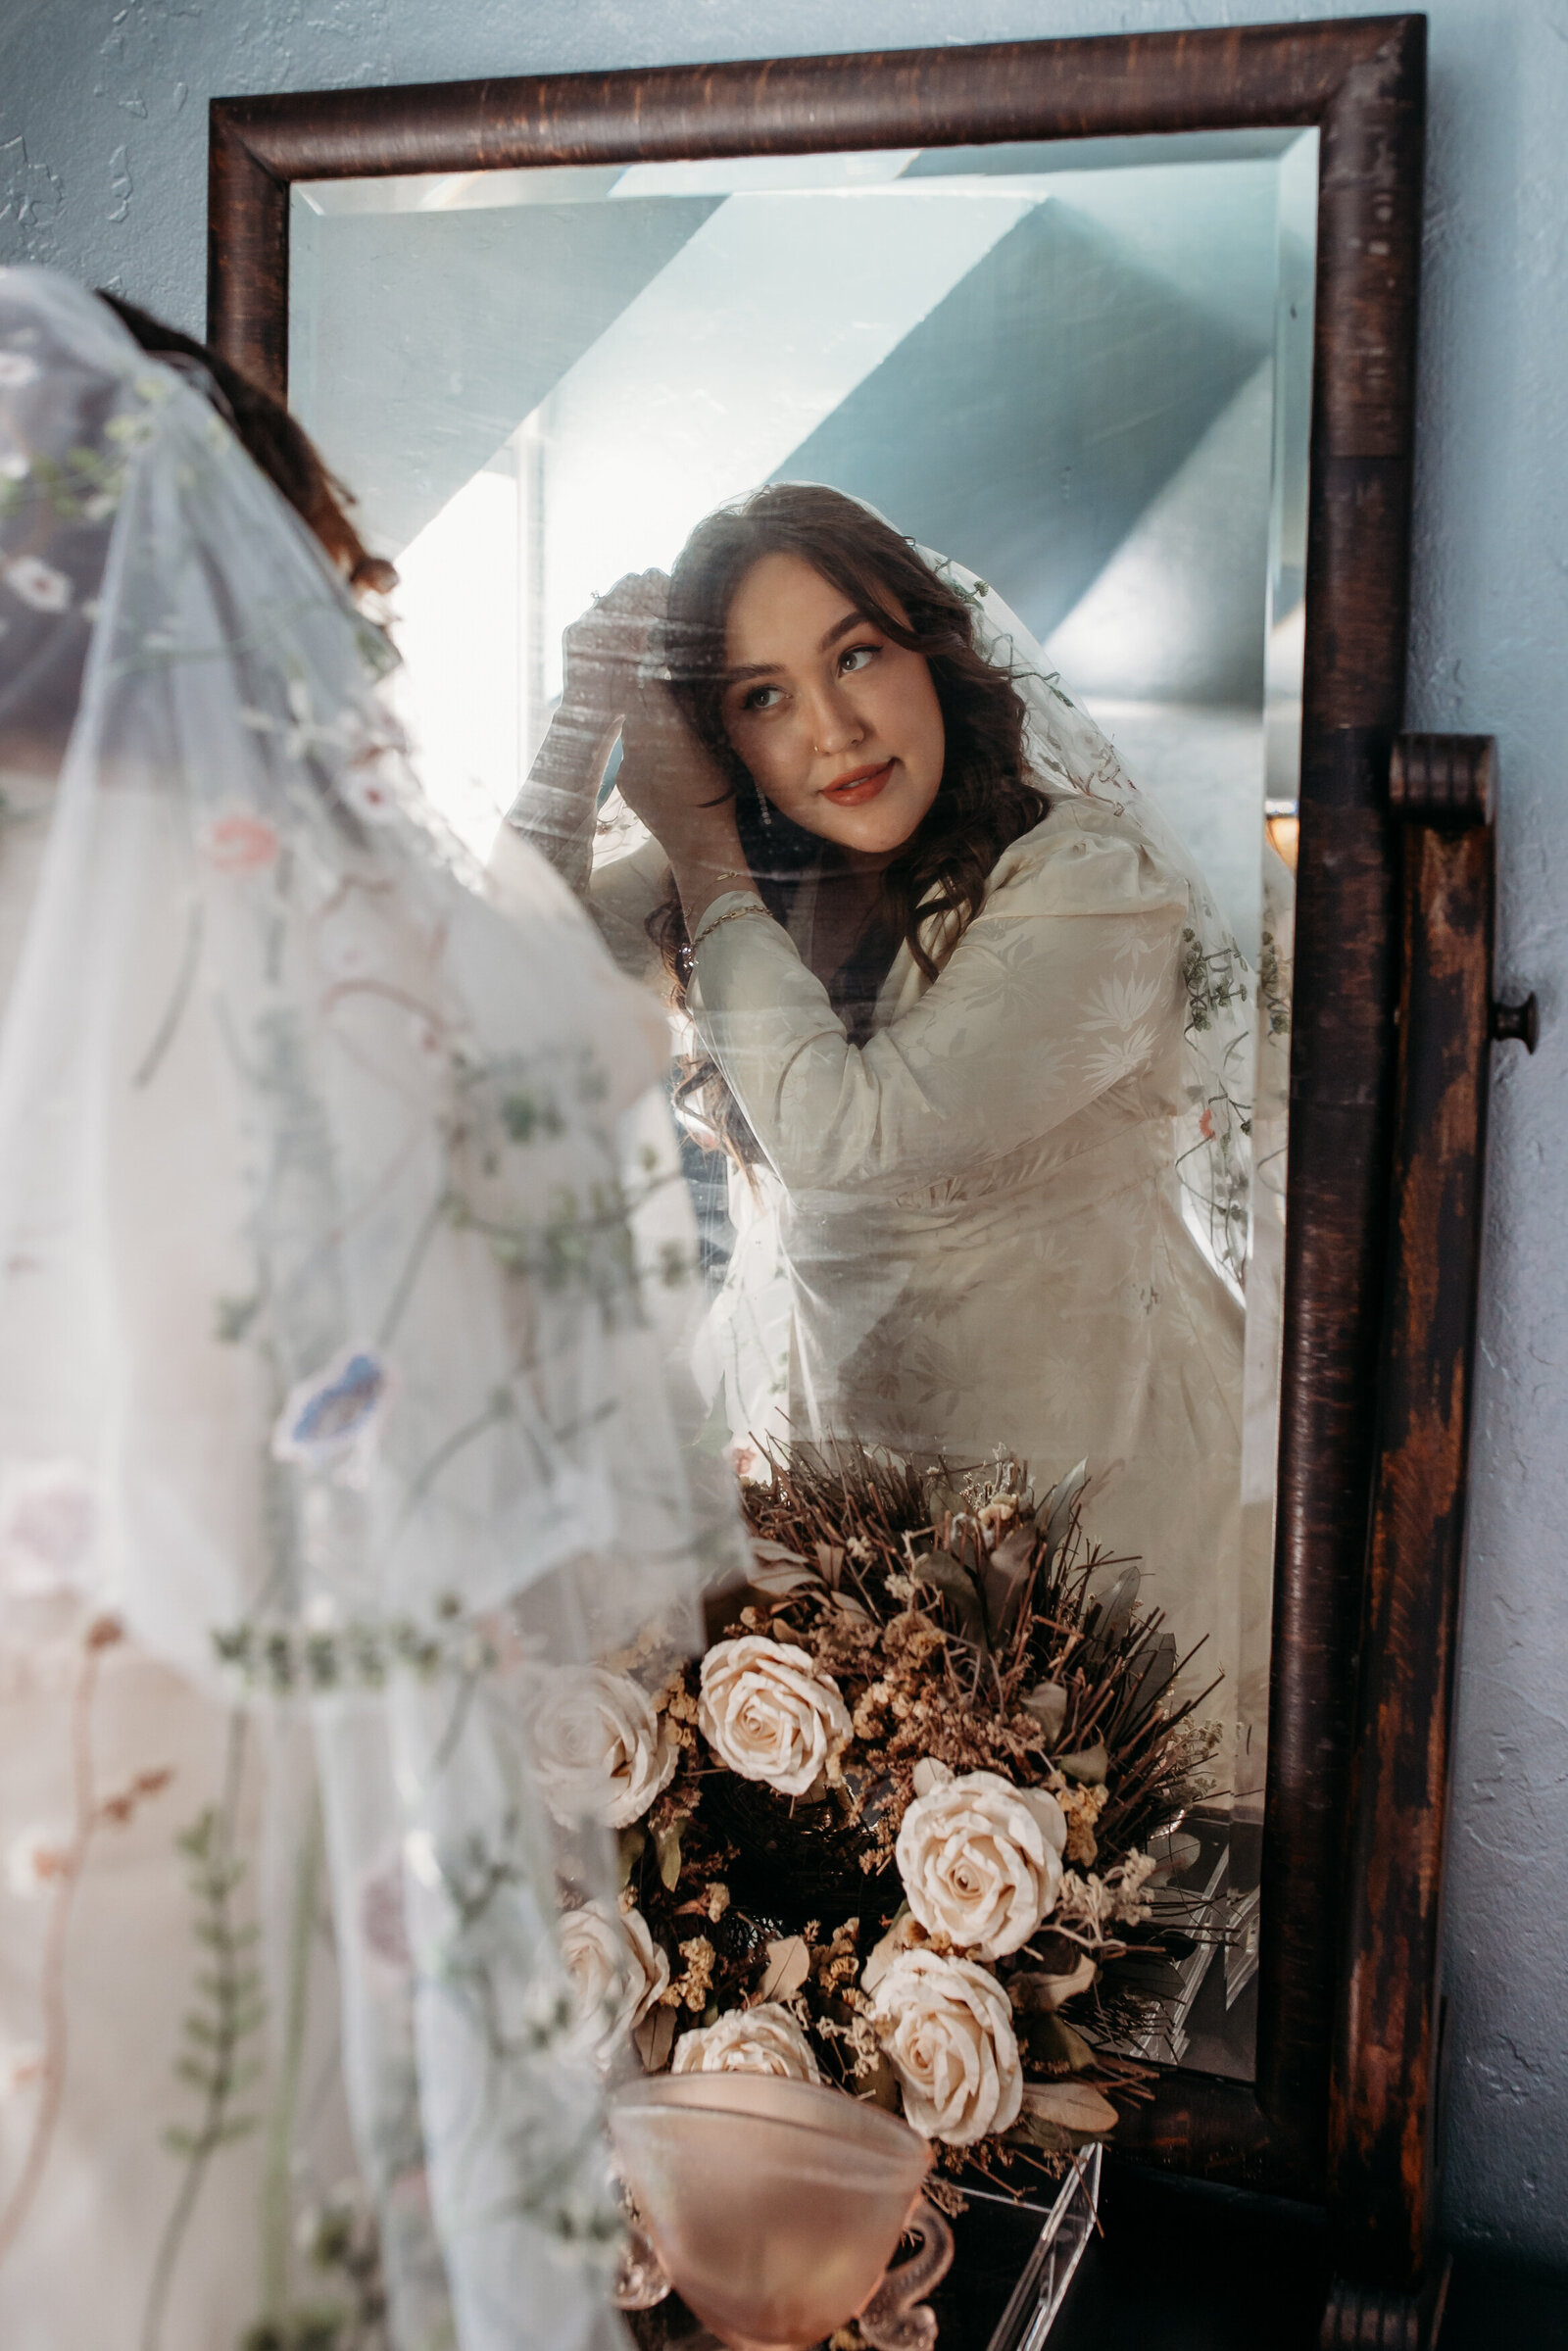 A bride in a detailed gown admires her reflection in a vintage mirror